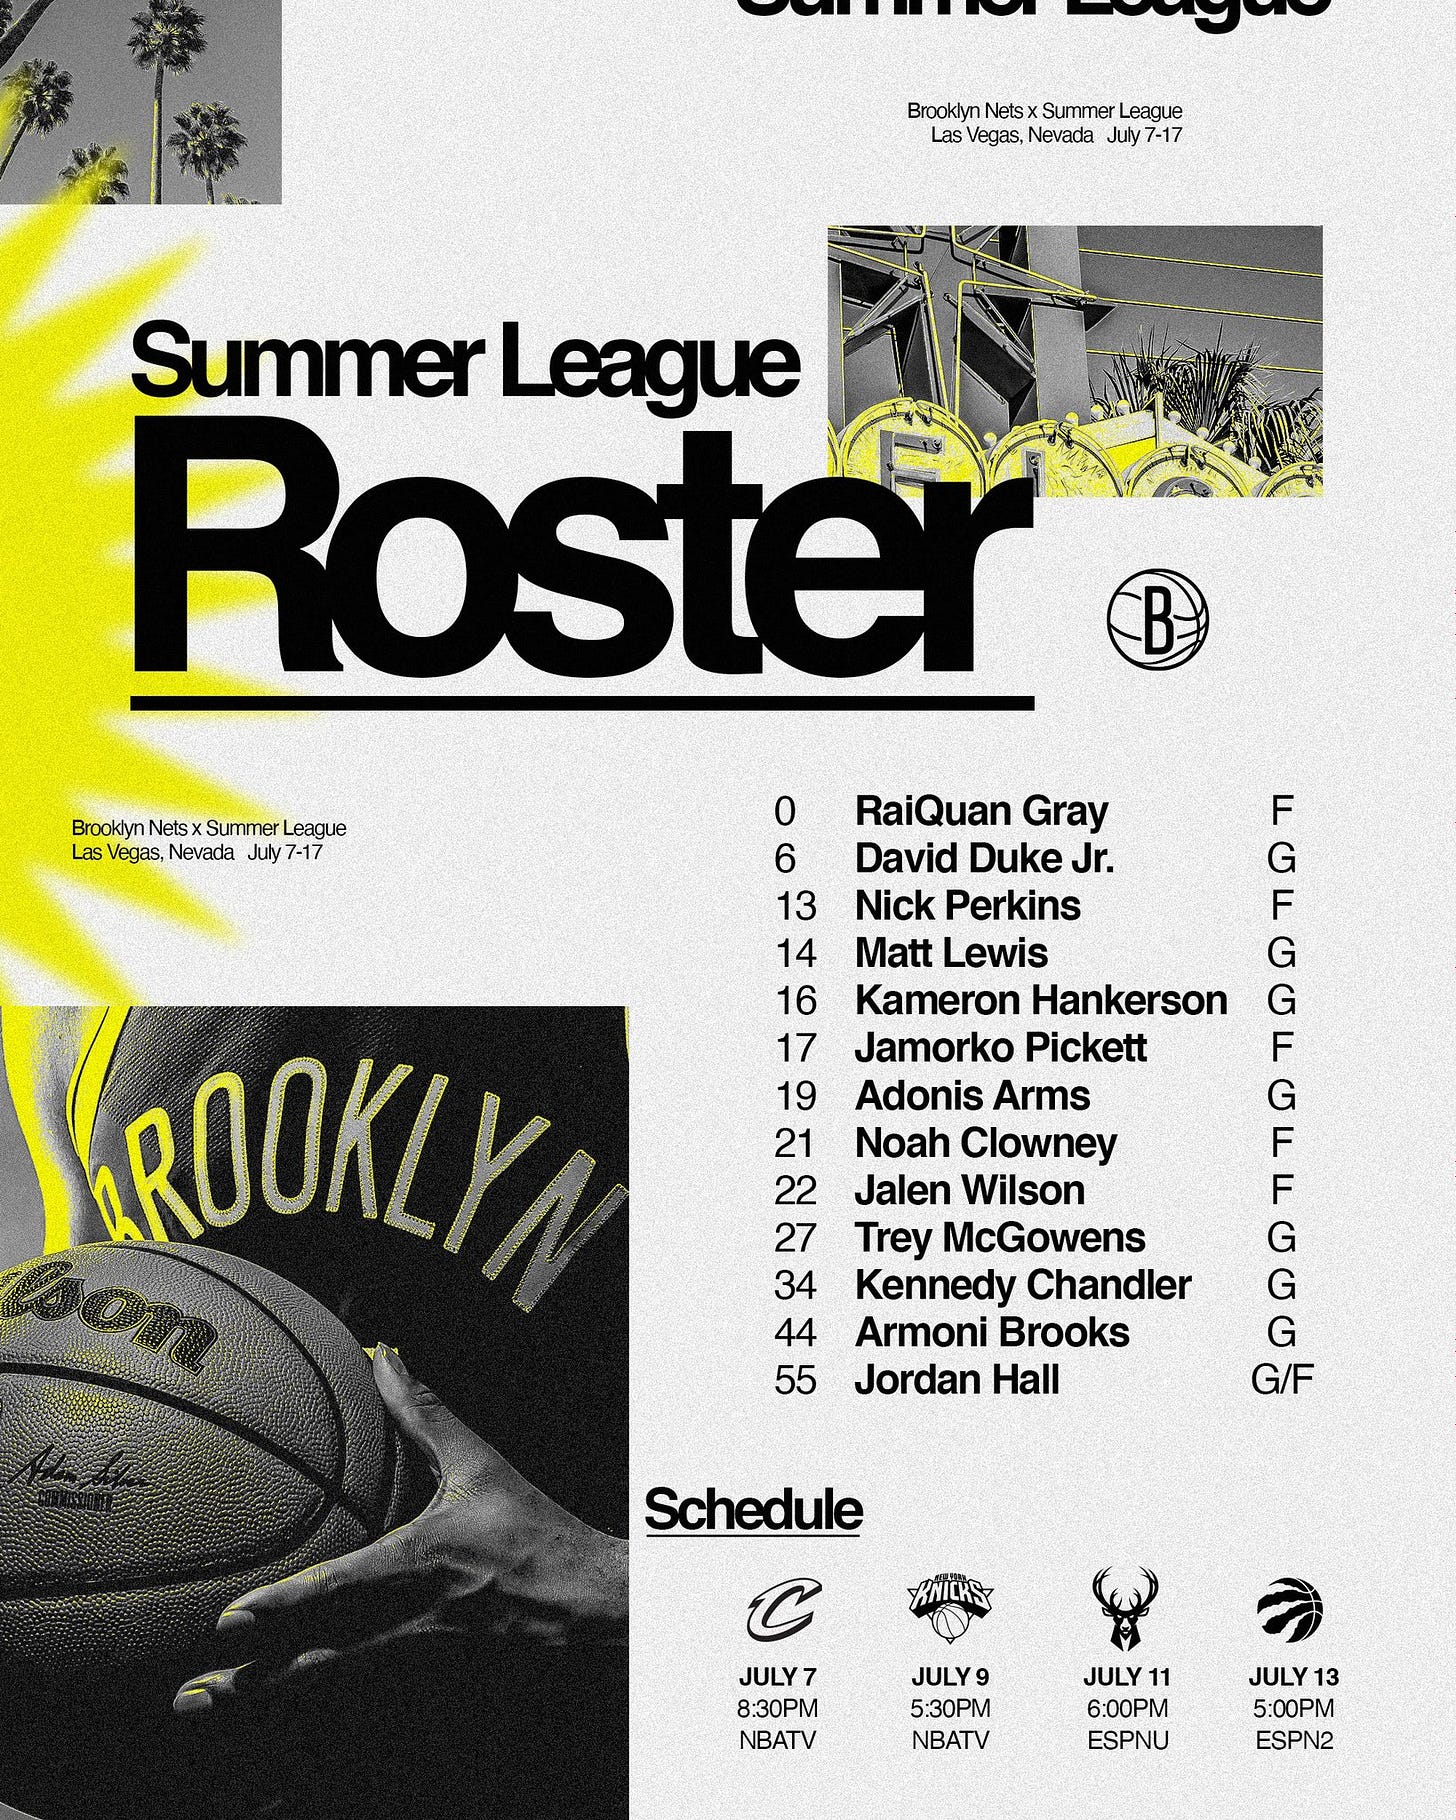 Nets Summer League roster and schedule graphic